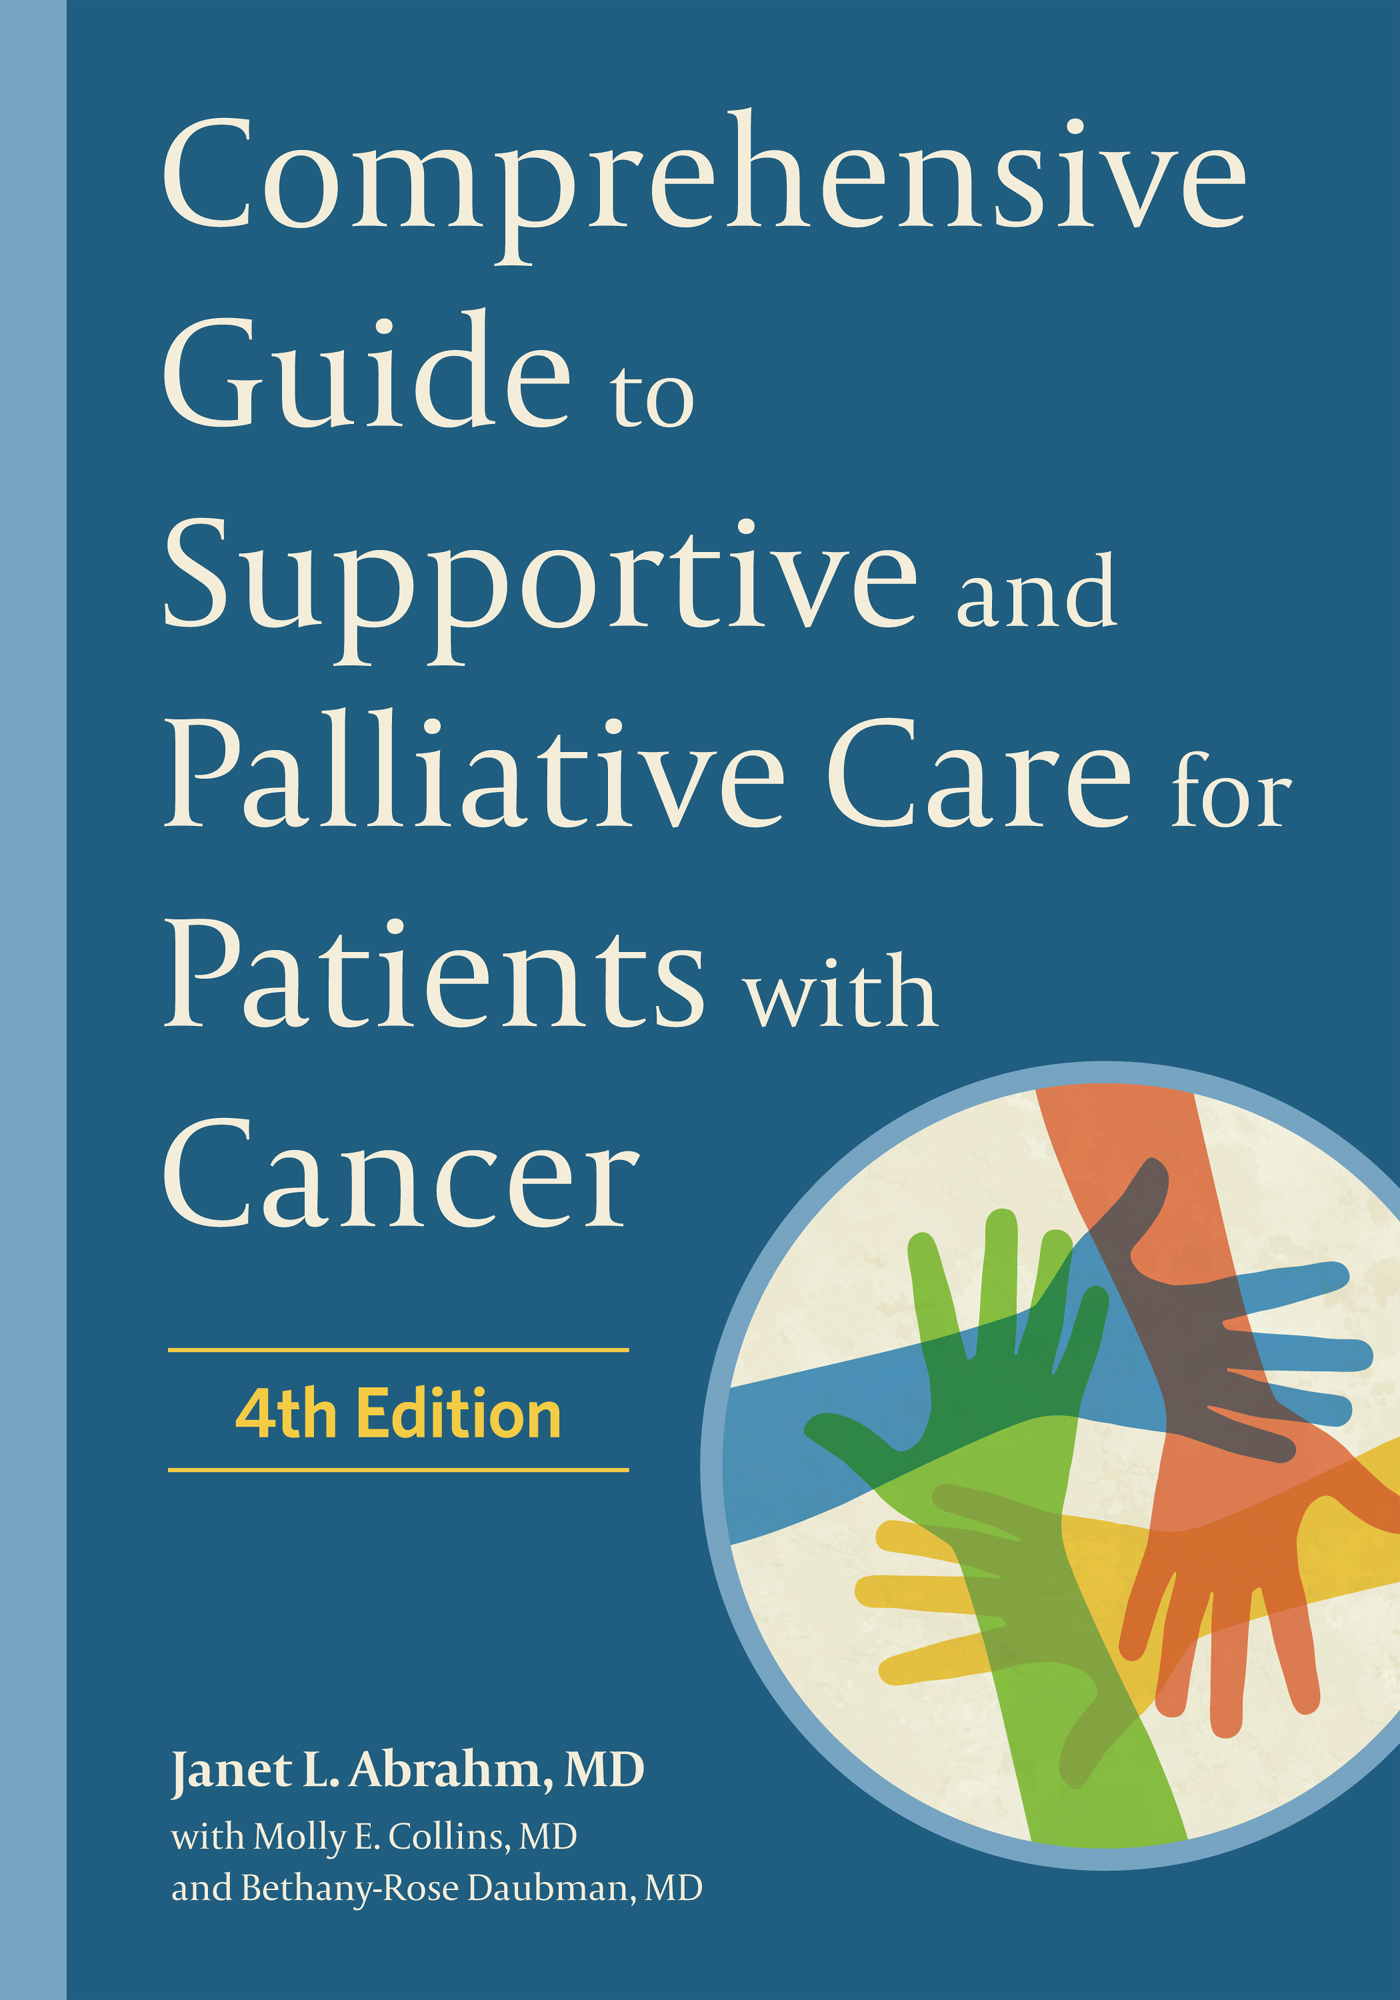 Comprehensive Guide to Supportive and Palliative Care for Patients with Cancer - photo 1